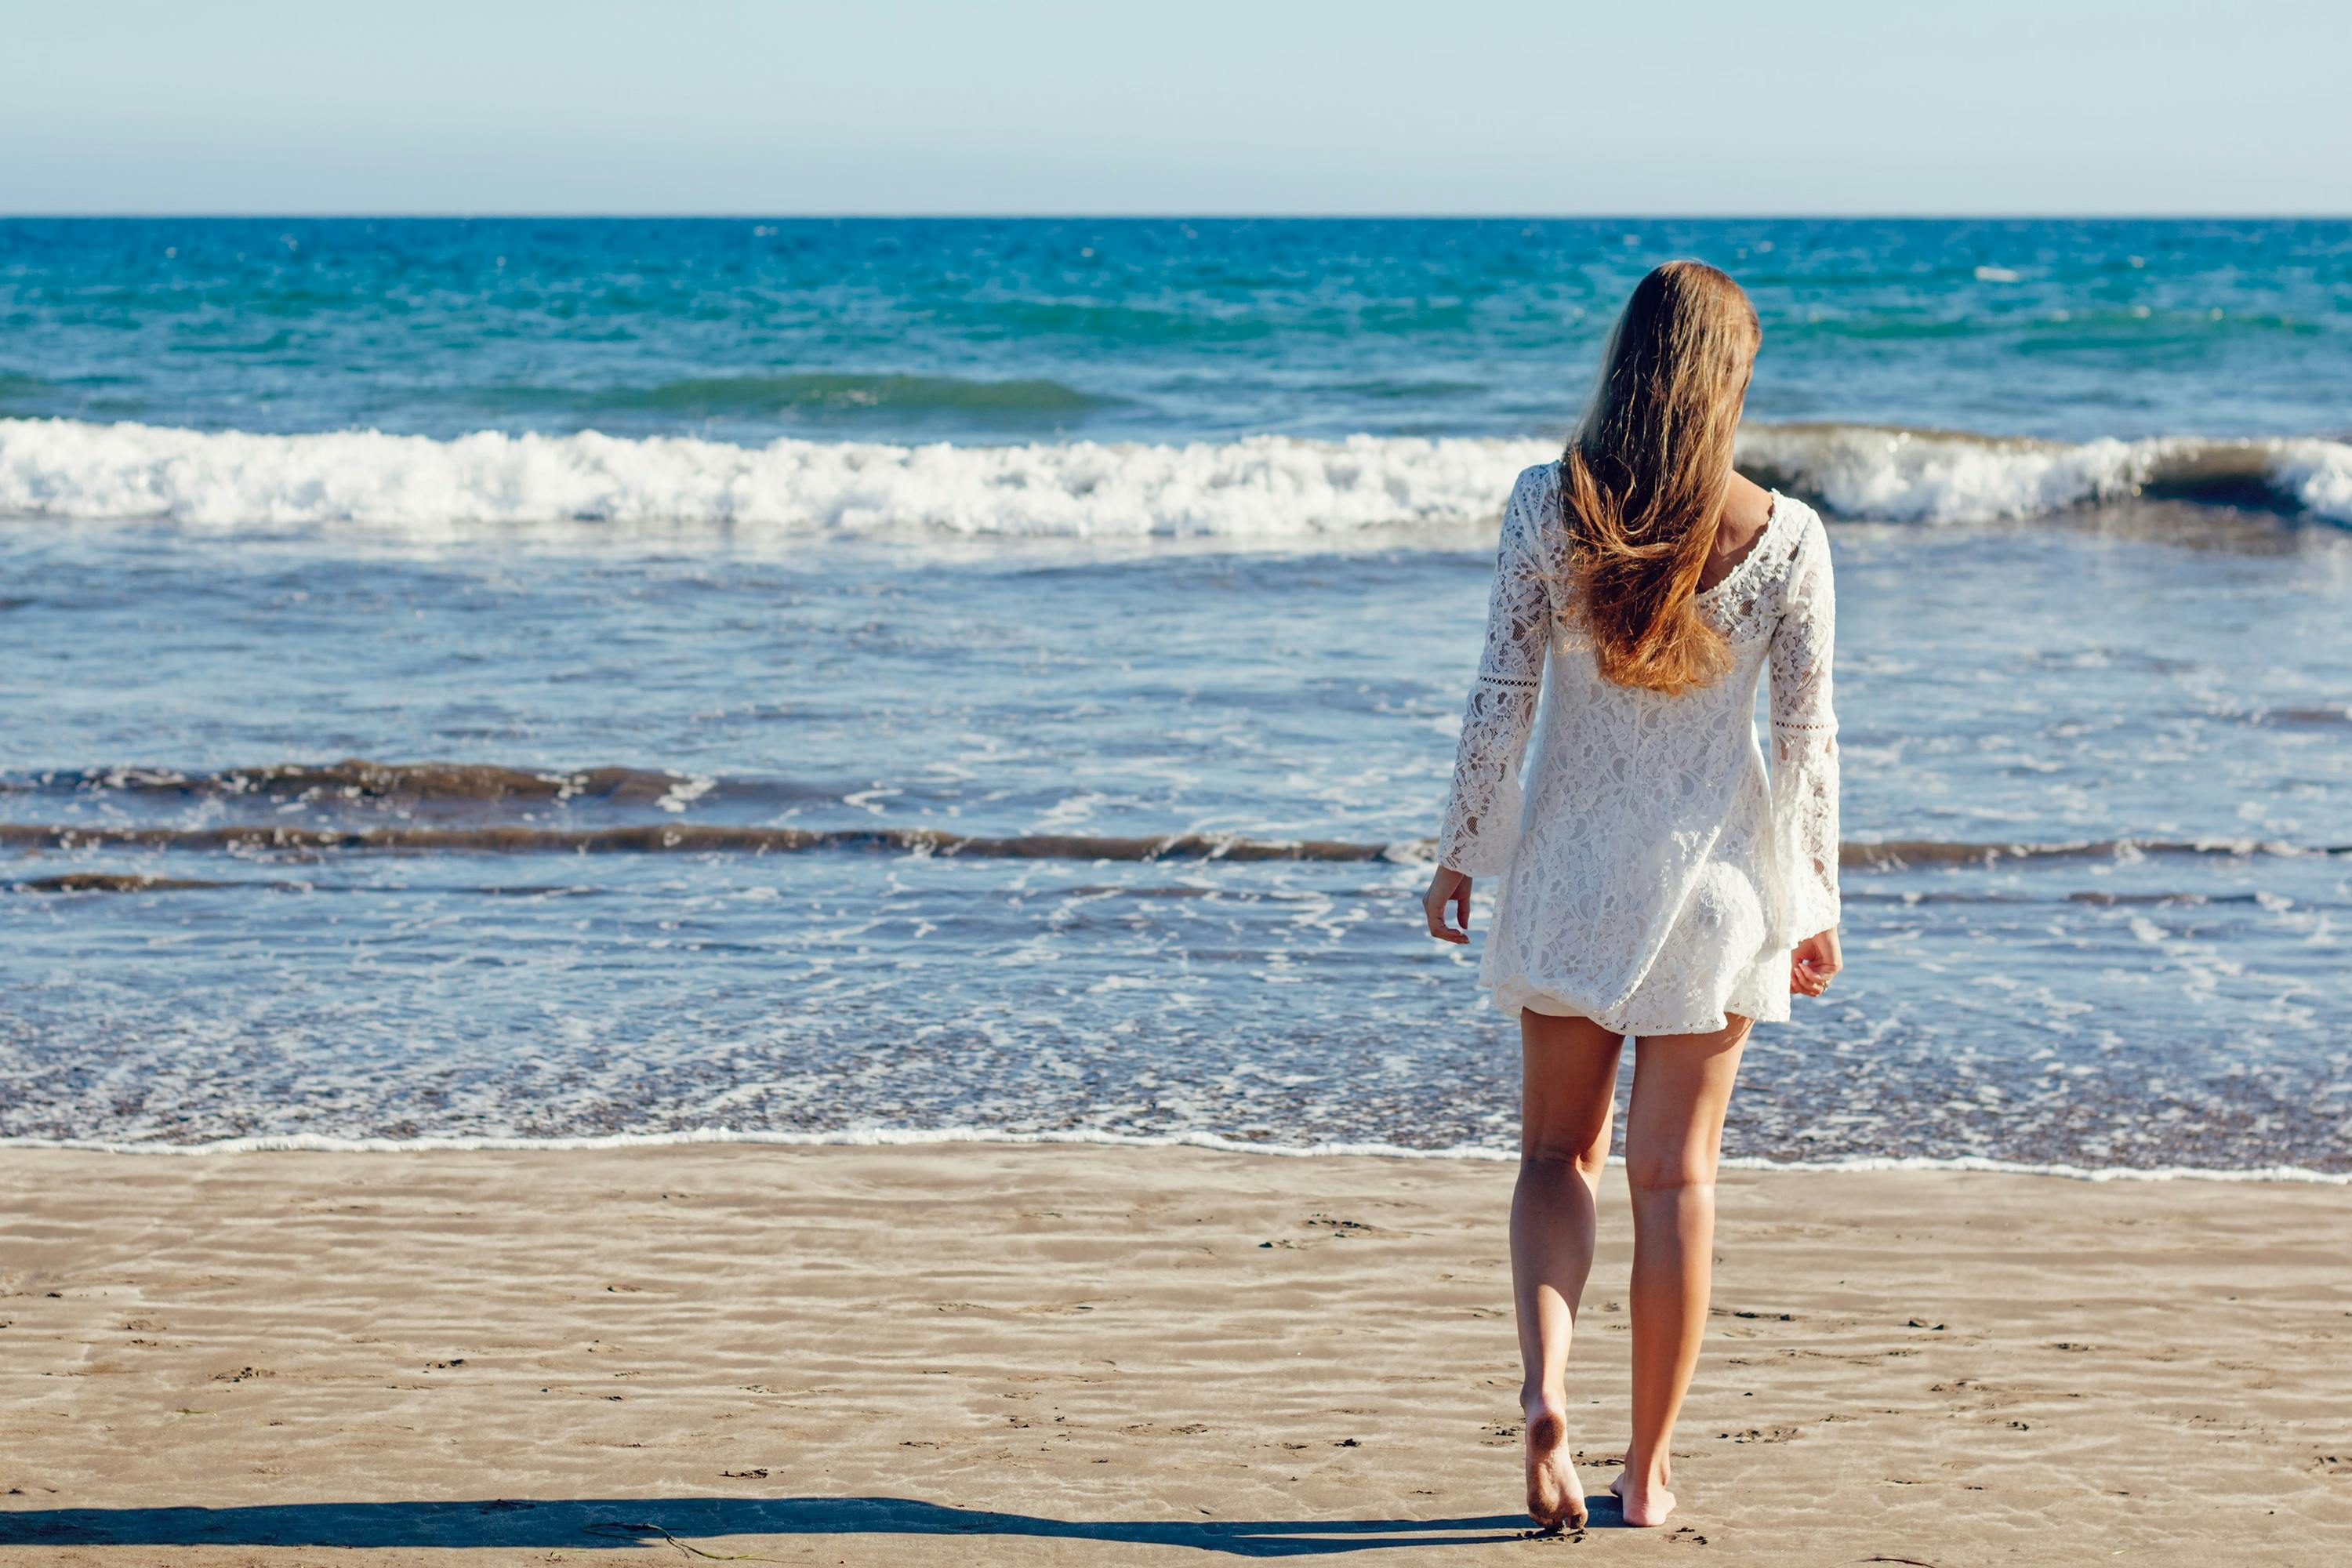 Brown Haired Woman in White Lace Long Sleeve Mini Dress Standing on Seashore \u00b7 Free Stock Photo